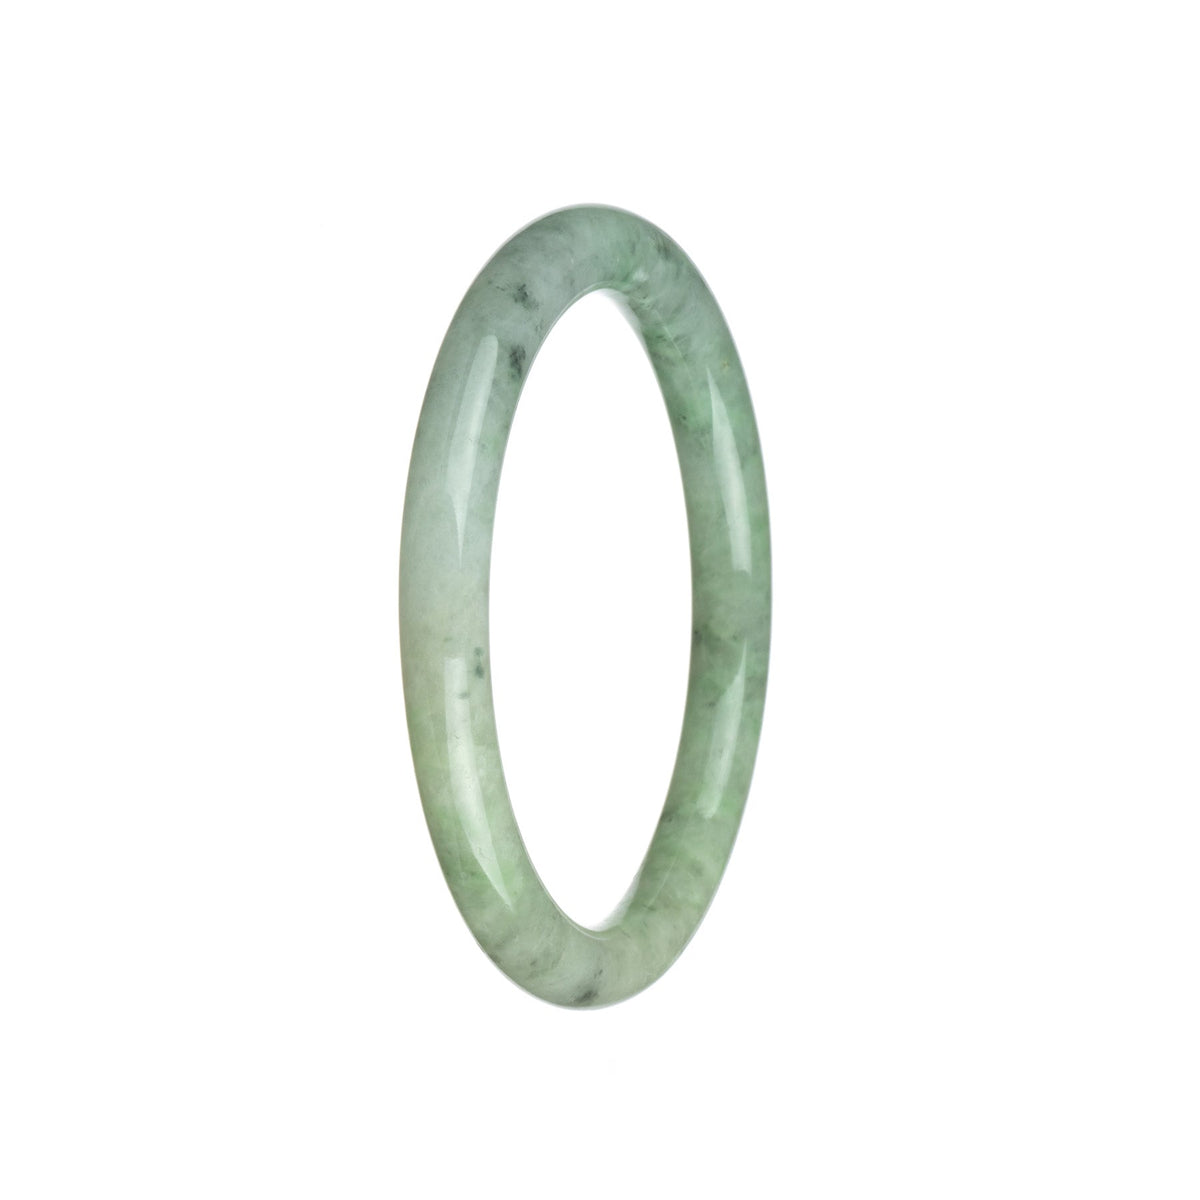 A close-up image of a petite round green and white jade bracelet, made with genuine Grade A Burma jade. The bracelet has a smooth and polished surface, showcasing the natural beauty of the jade.